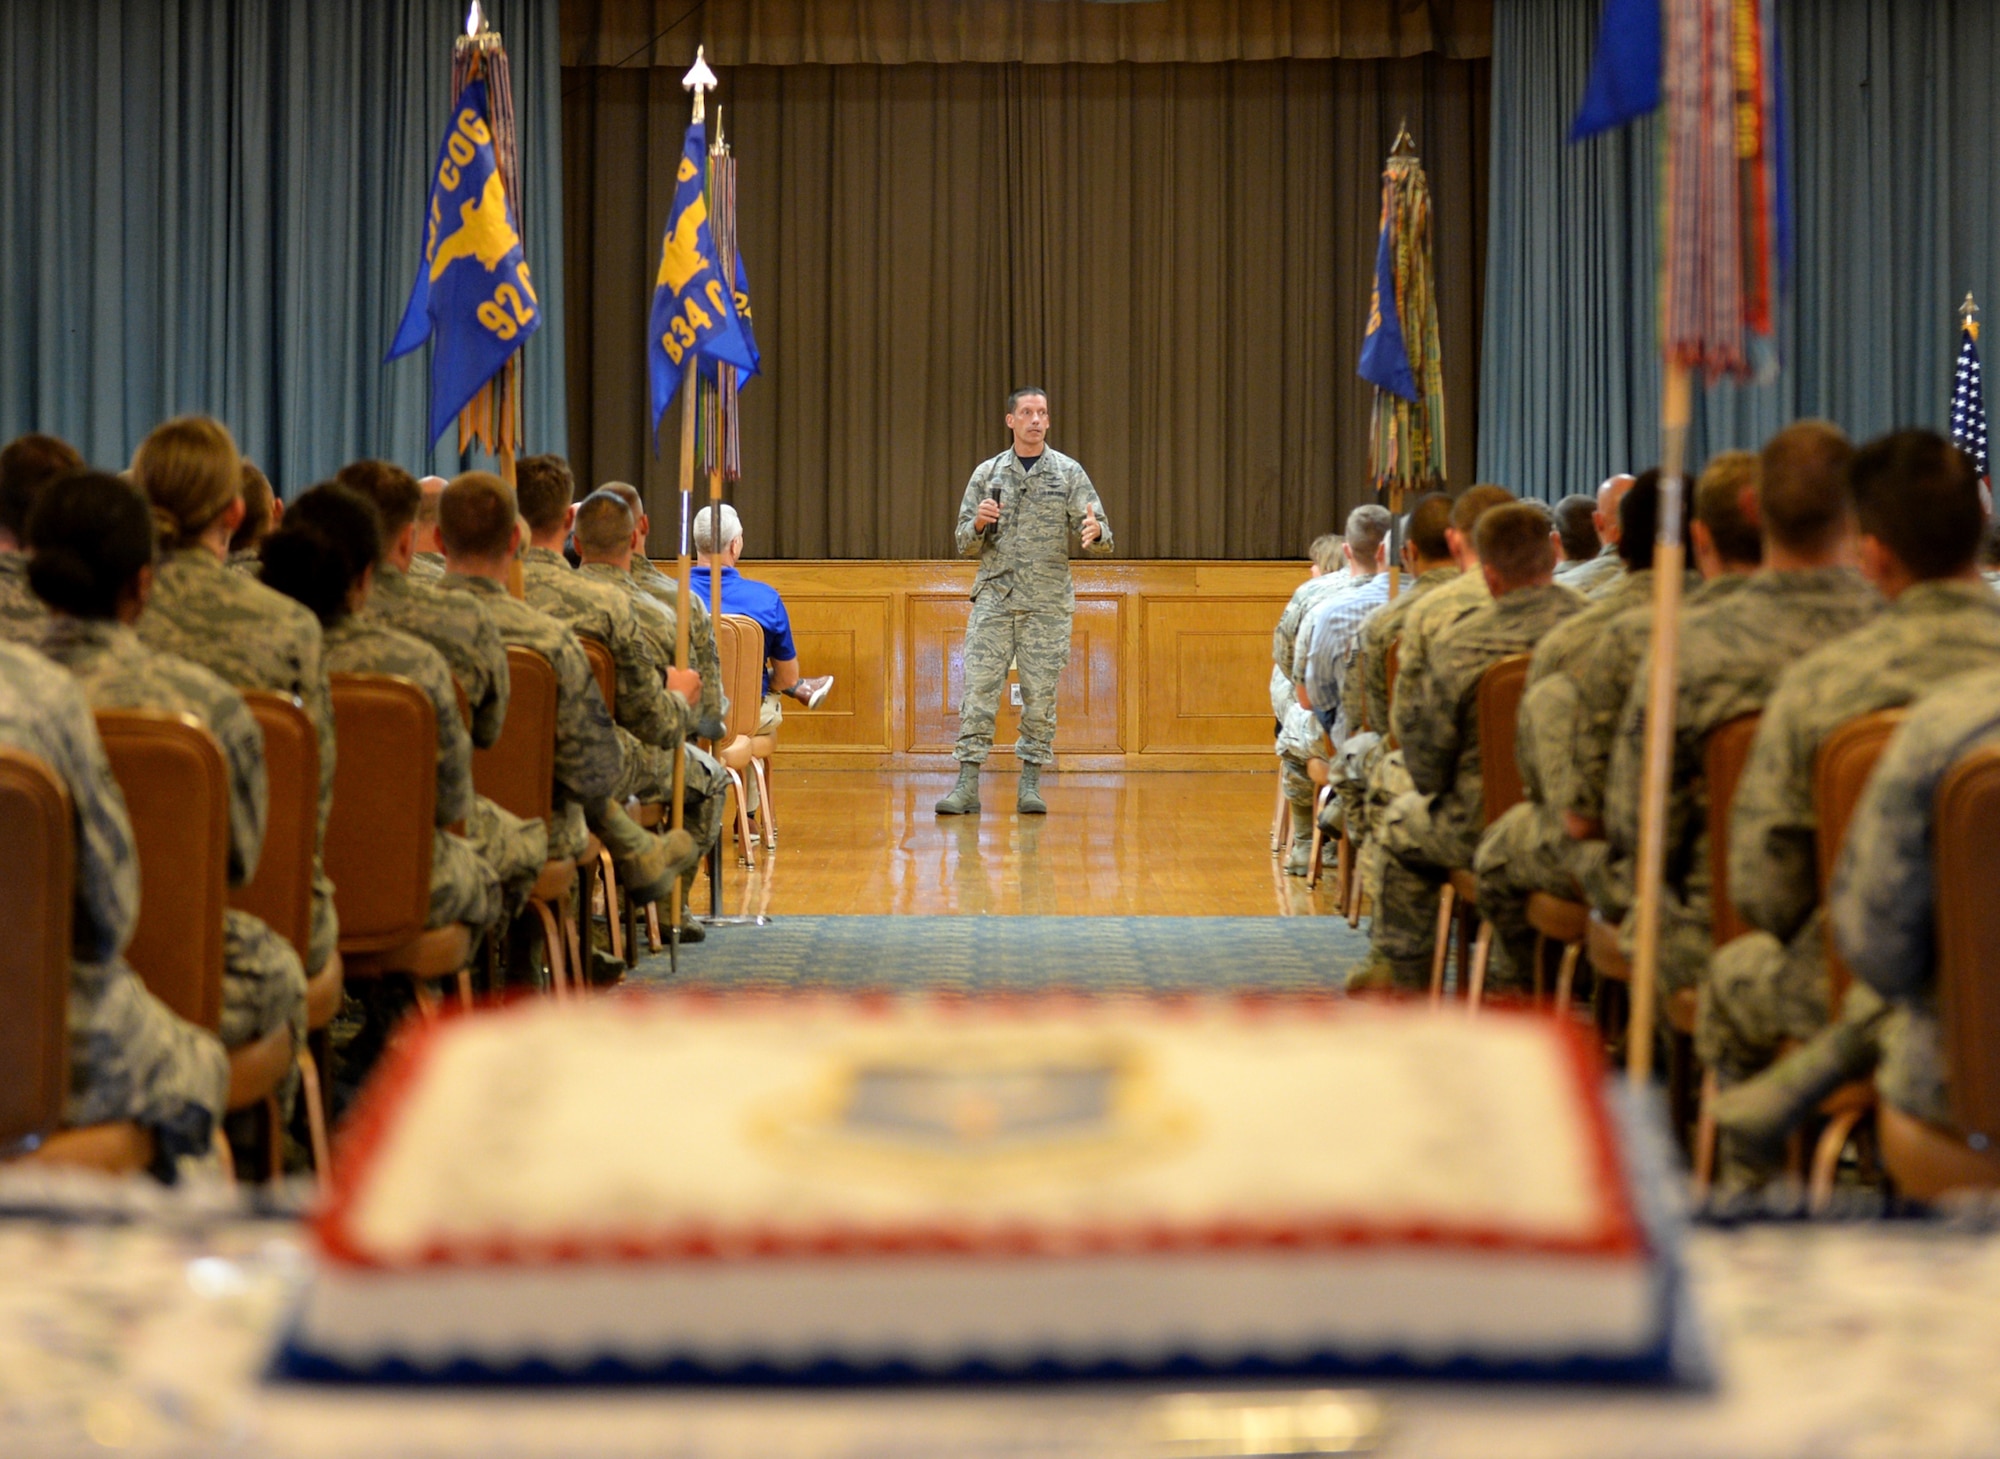 Maj. Gen. Robert Skinner, Air Forces Cyber commander, speaks to Airmen during his commander's call at Joint Base San Antonio-Lackland, Texas, Aug. 17, 2018. The call was also hosted to celebrate the unit's ninth birthday since its Aug. 18, 2009 activation. (U.S. Air Force photo by Tech. Sgt. R.J. Biermann)